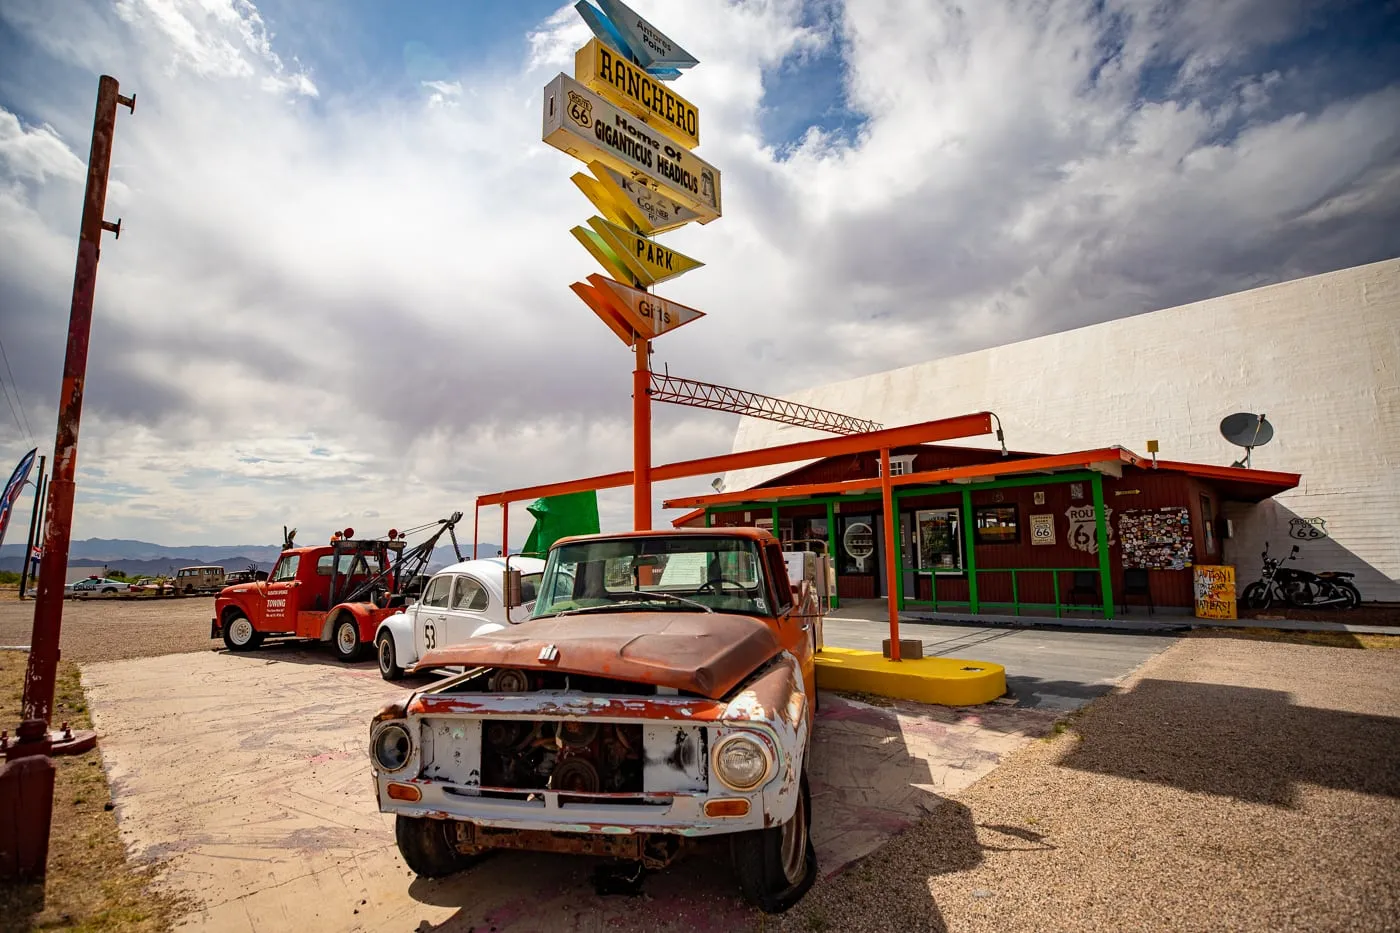 Antares Point Visitor Center & Gift Shop on Route 66 in Kingman, Arizona